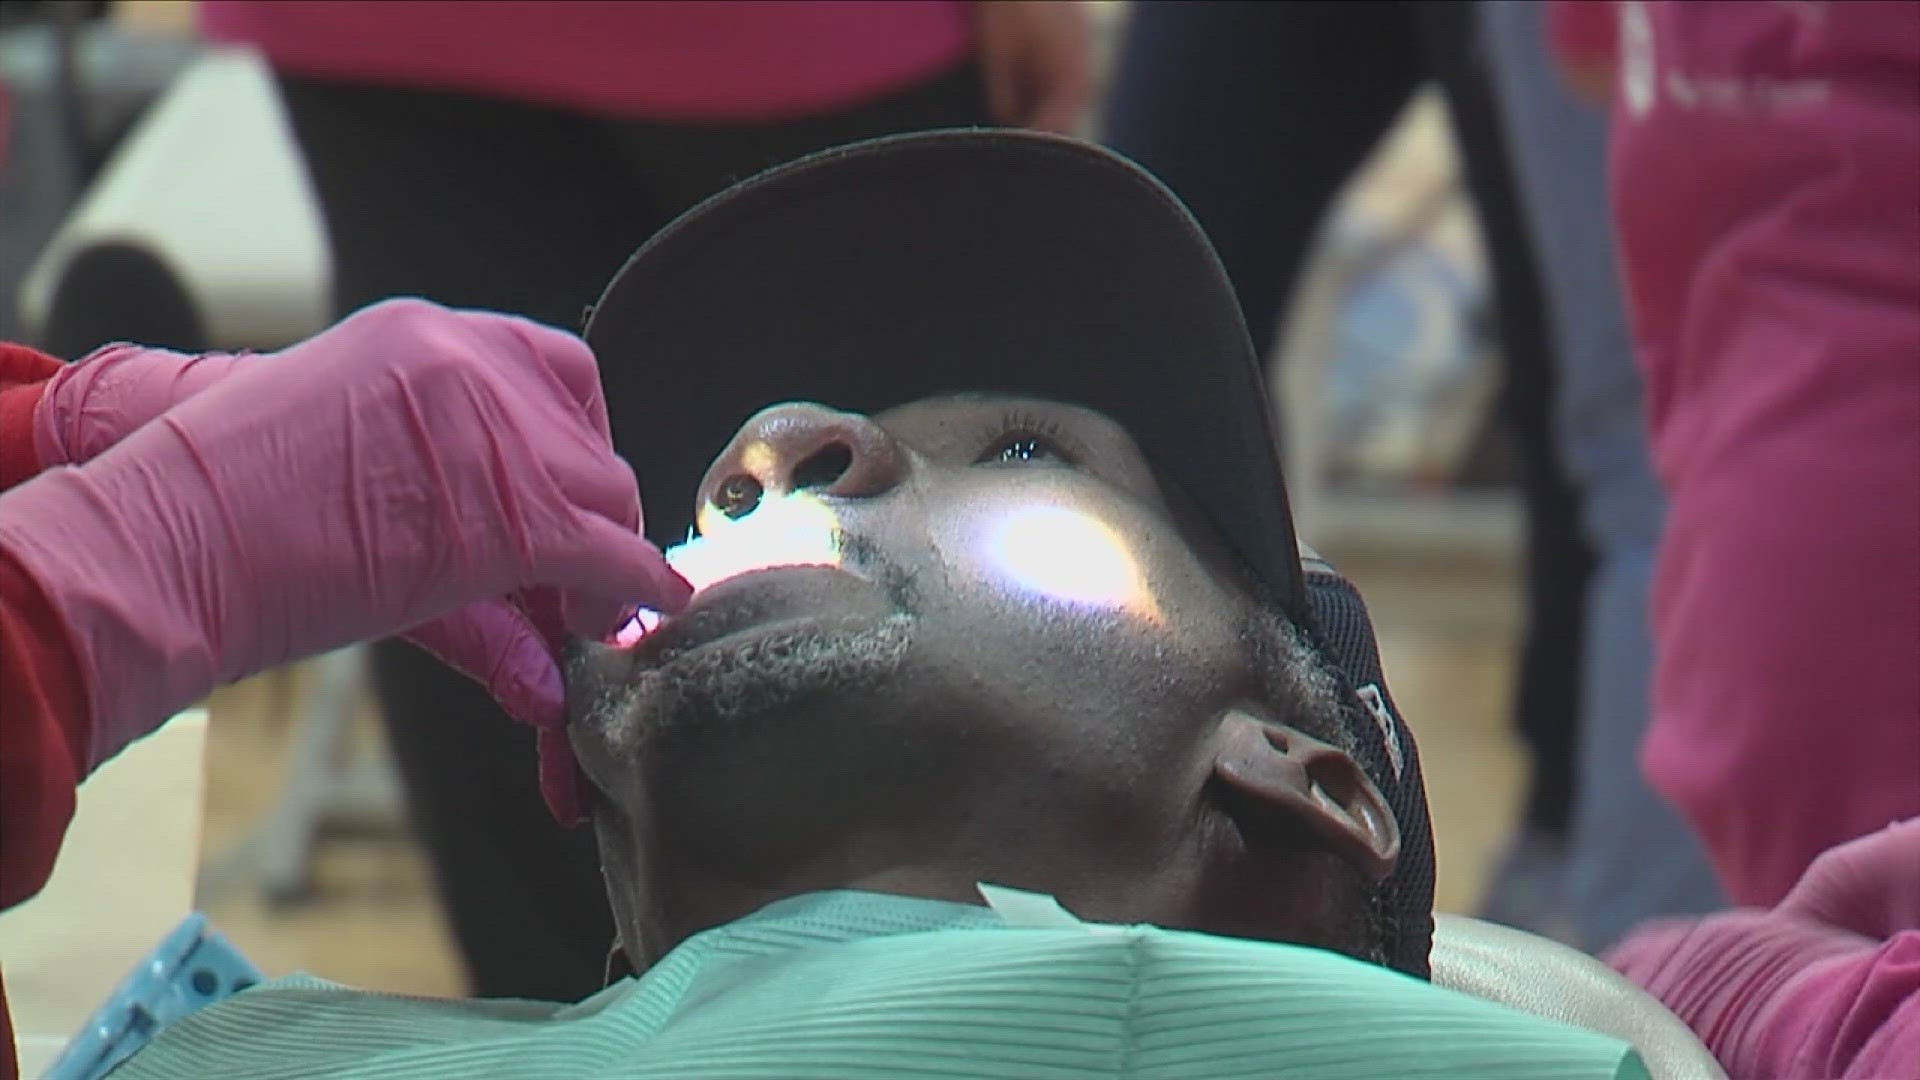 Free clinic returns bring dentistry to Memphis in need